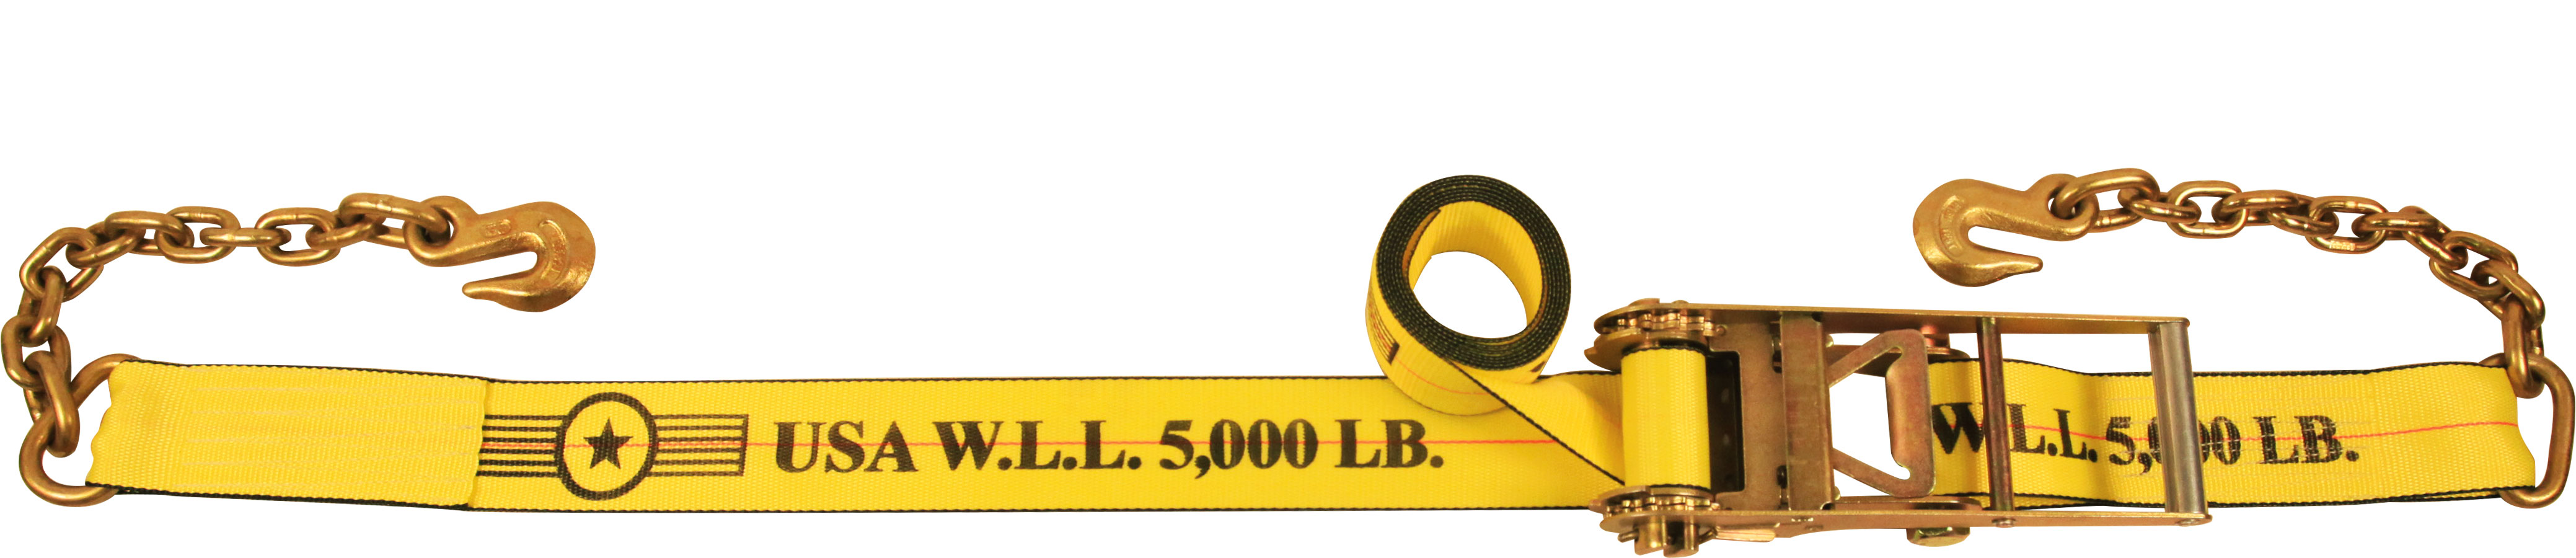 3 Inch Ratchet Straps & Tie Downs for Flatbed Trailers | Made in the USA 3 Inch Ratchet Straps With Chain Ends